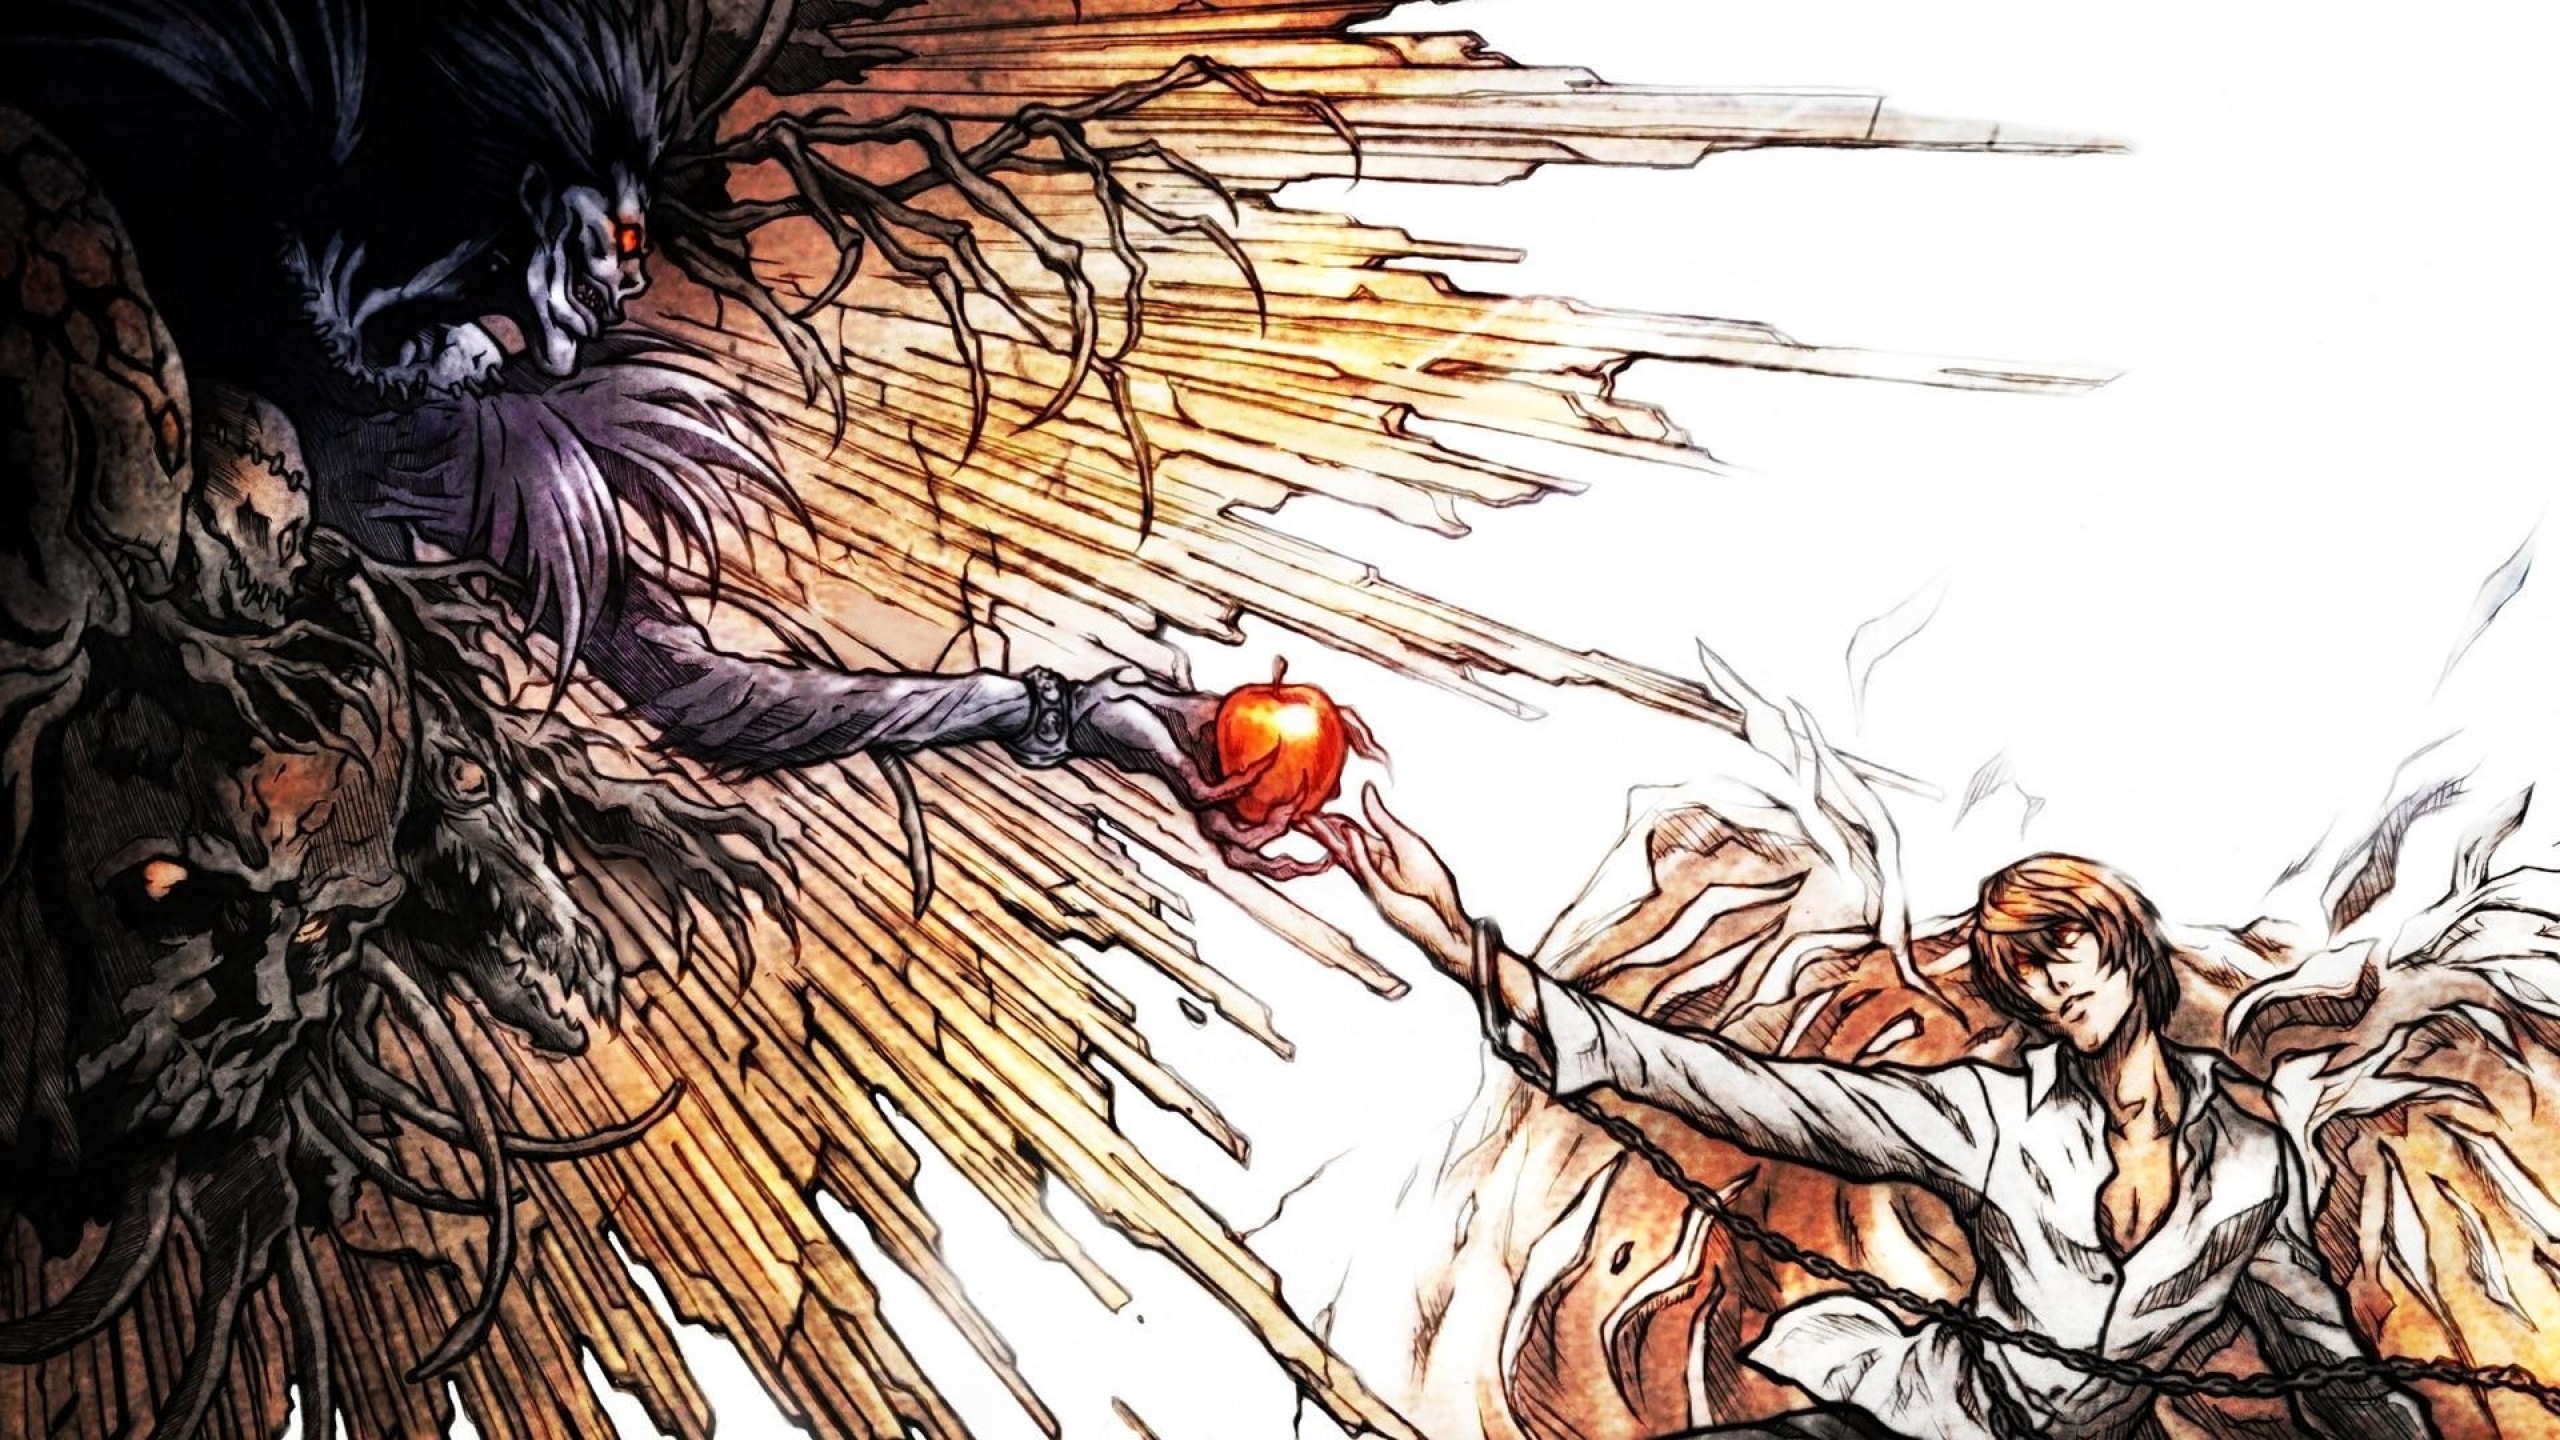 Download wallpapers 2560x1440 death note, light yagami, ryuk